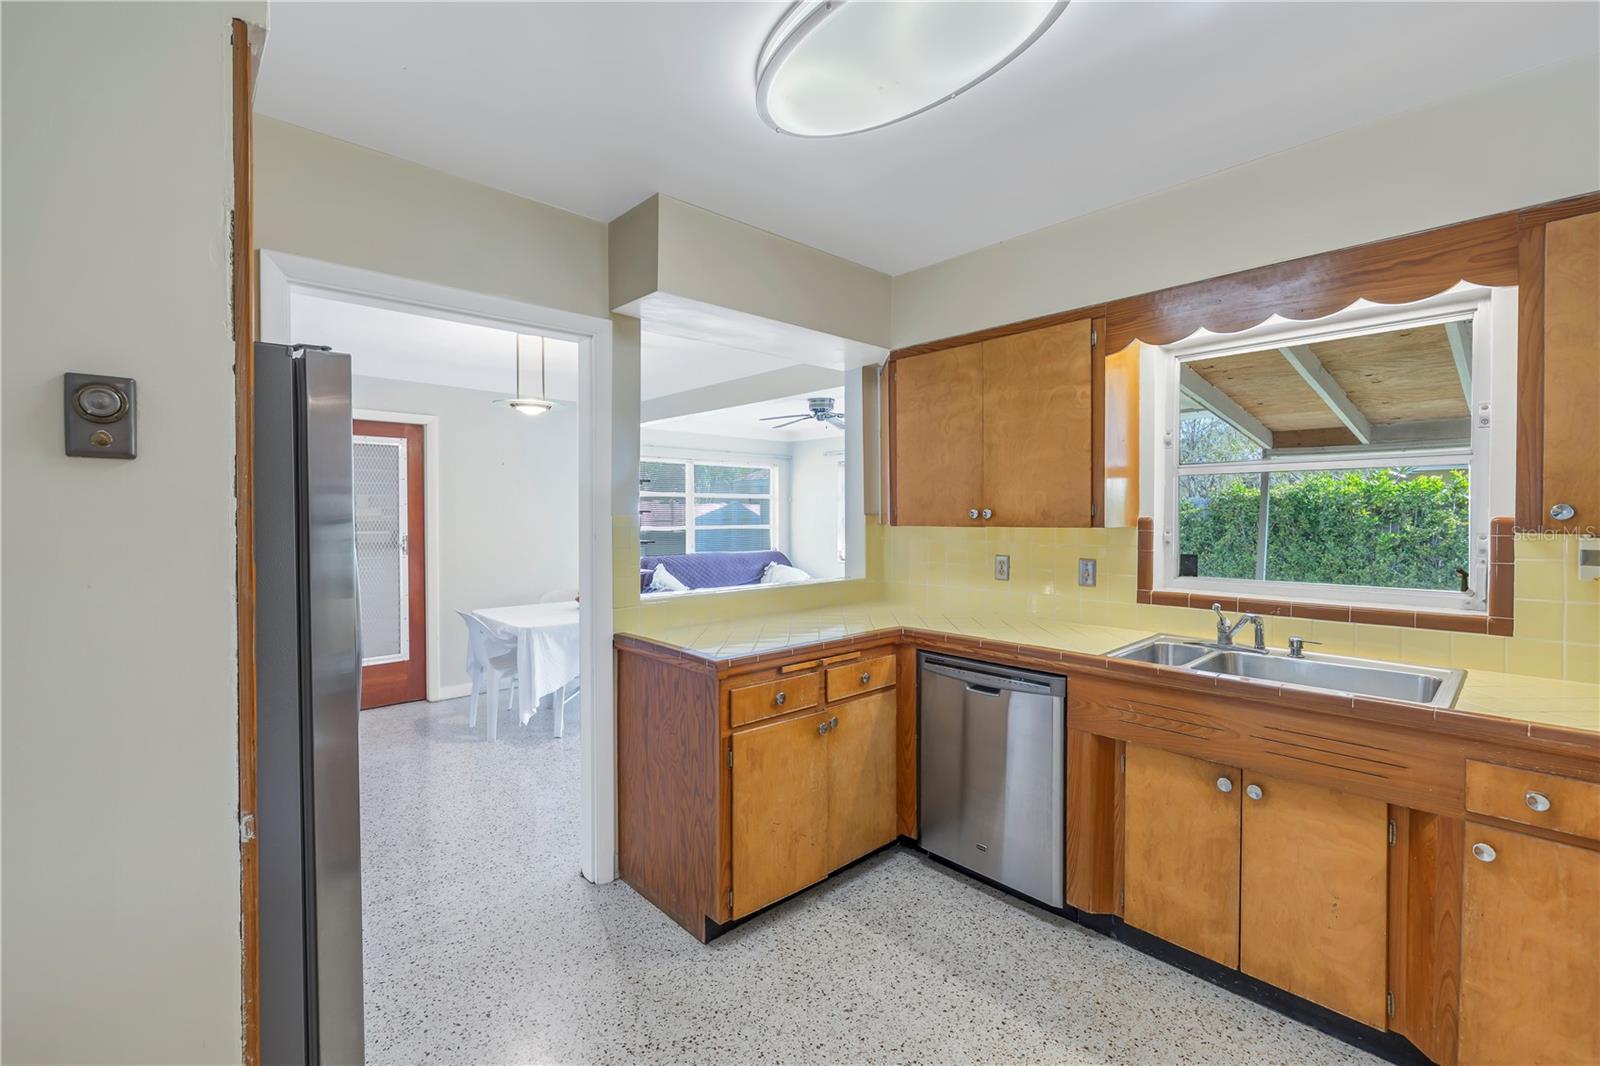 Note the pristine, original 2 tone tile countertops complimented with a newer stainless steel dishwasher.